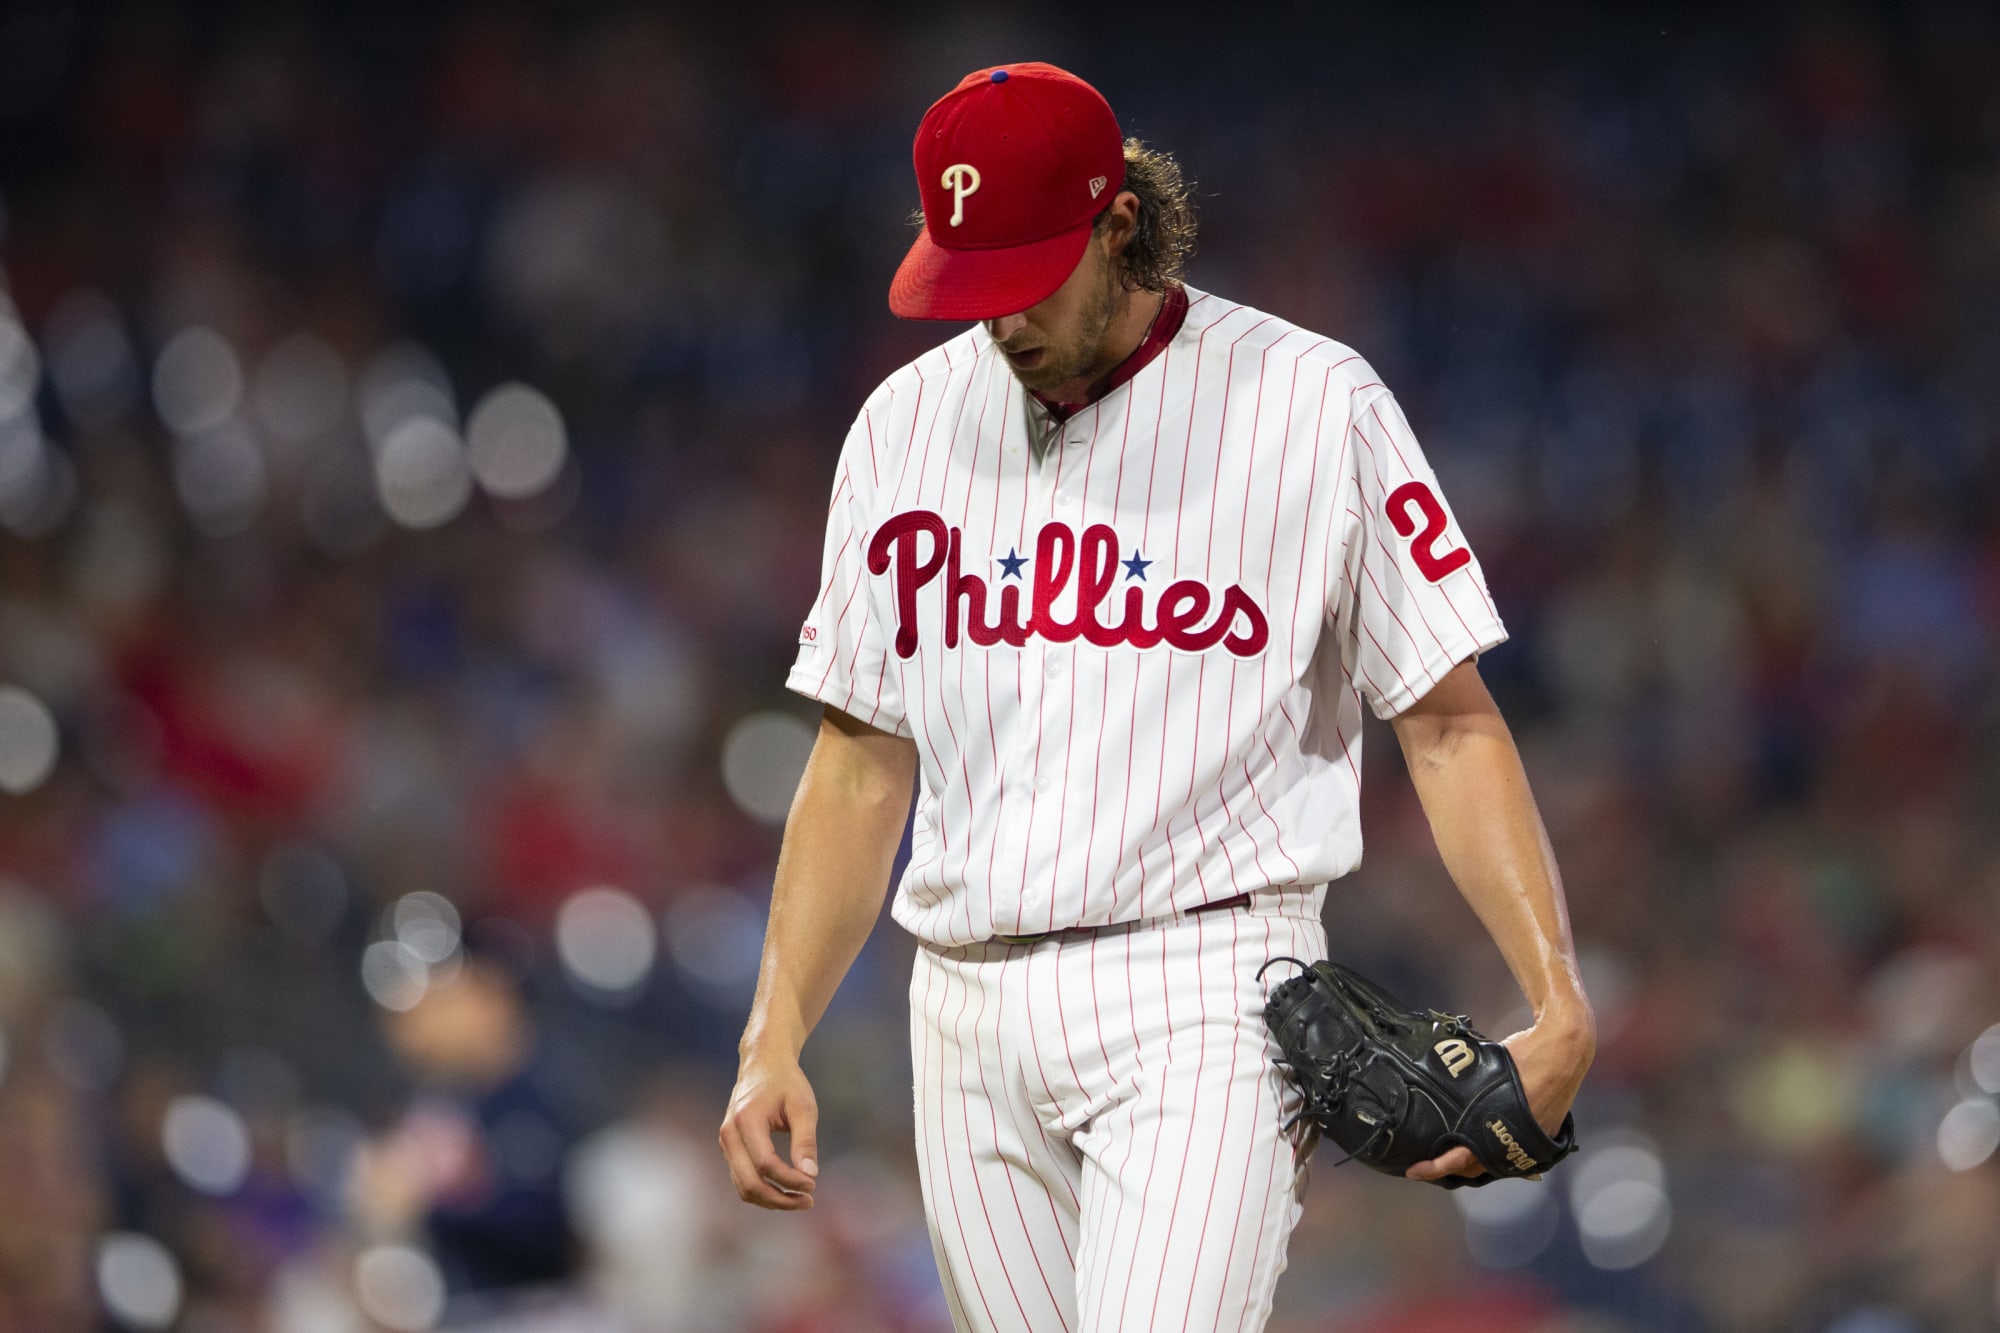 Philadelphia Phillies Philes Vol 1.25 Another September collapse